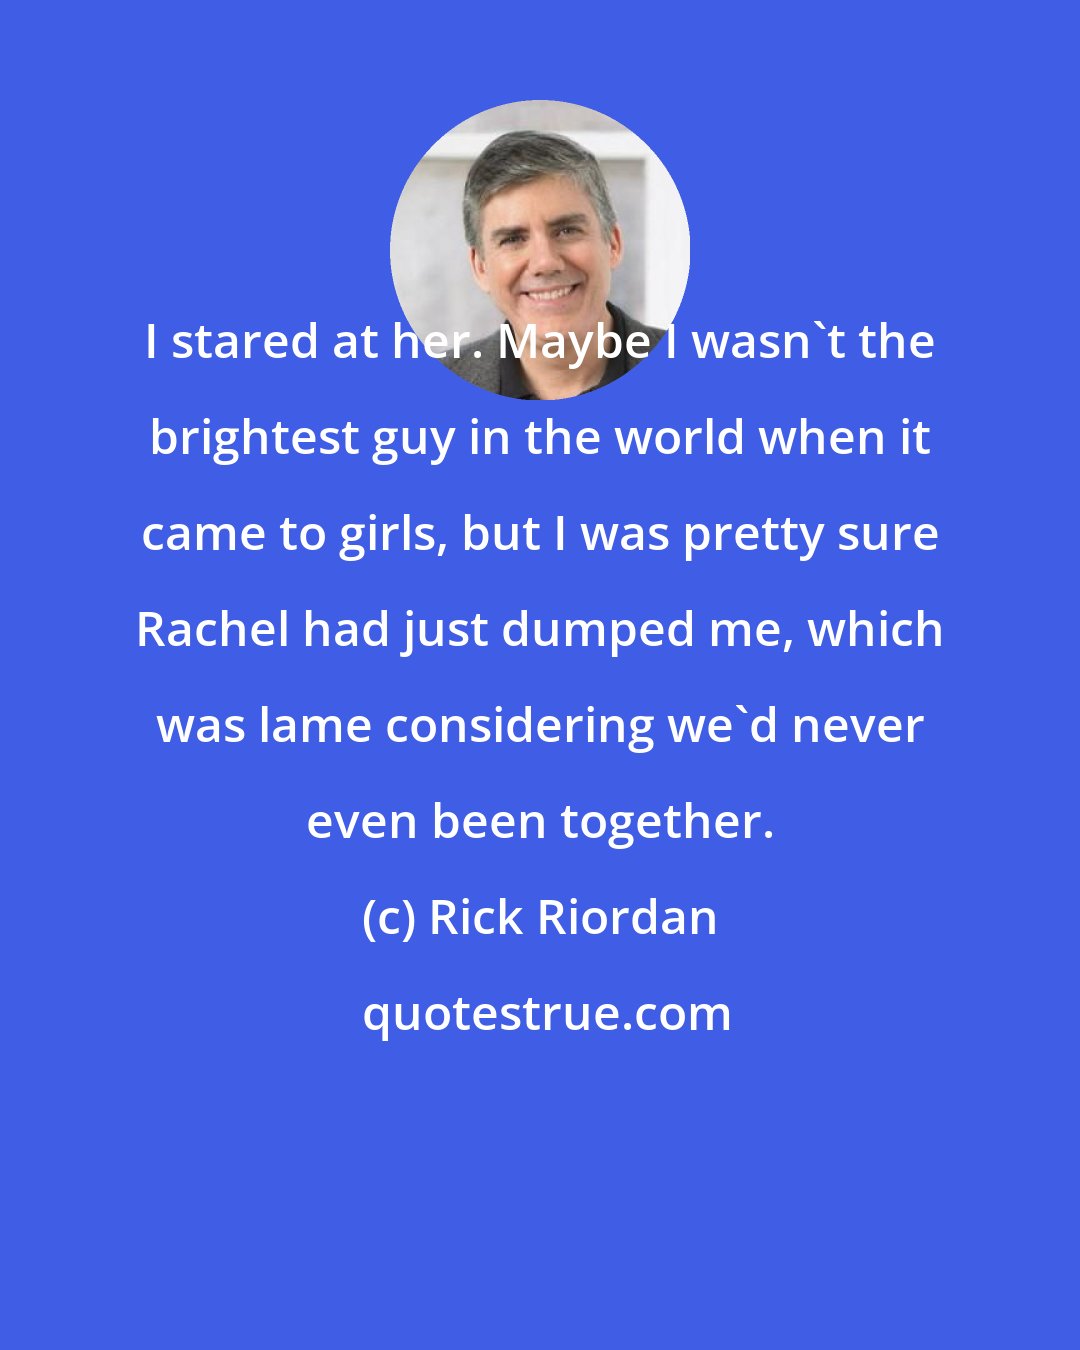 Rick Riordan: I stared at her. Maybe I wasn't the brightest guy in the world when it came to girls, but I was pretty sure Rachel had just dumped me, which was lame considering we'd never even been together.